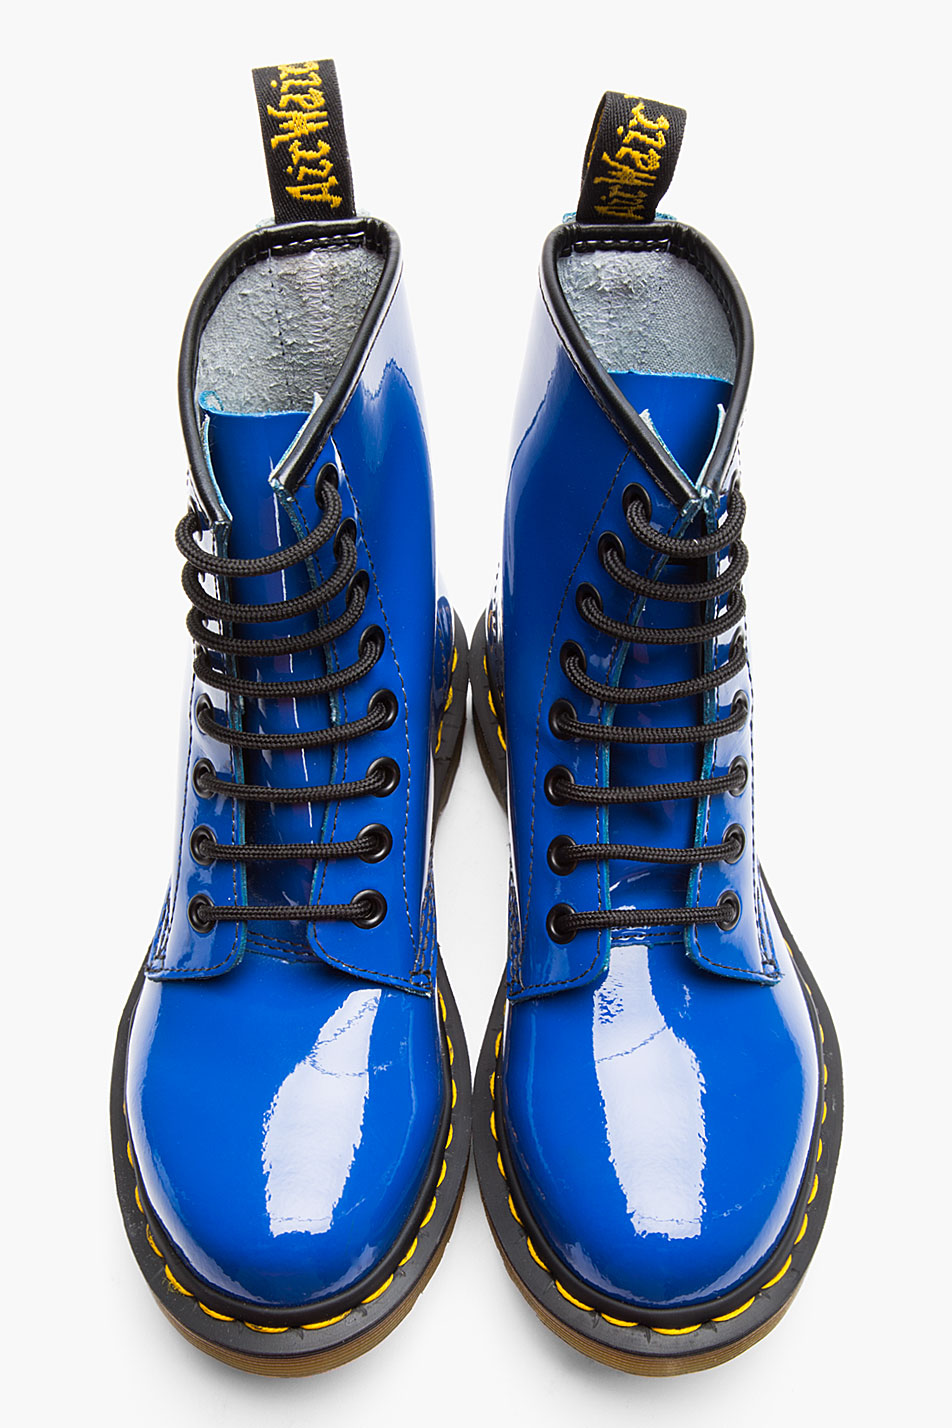 Lyst - Dr. martens Royal Blue Patent Leather W 8-eye Boots in Blue